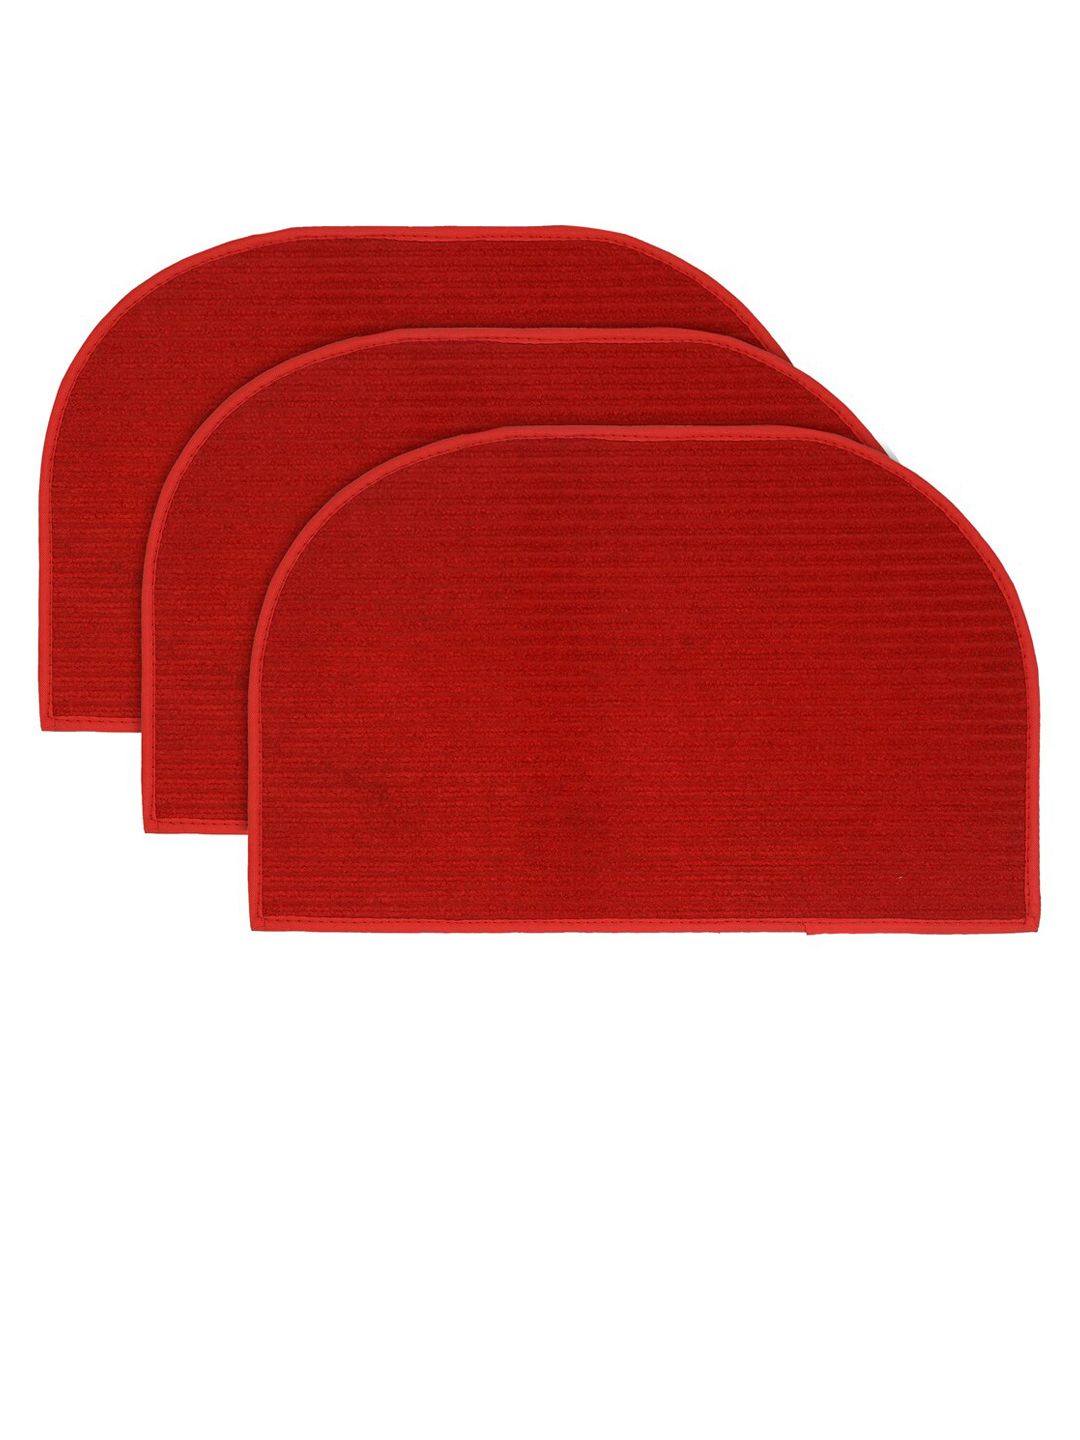 Kuber Industries Red Set Of 3 Solid D-Shaped Microfiber Anti-Skid Doormats Price in India